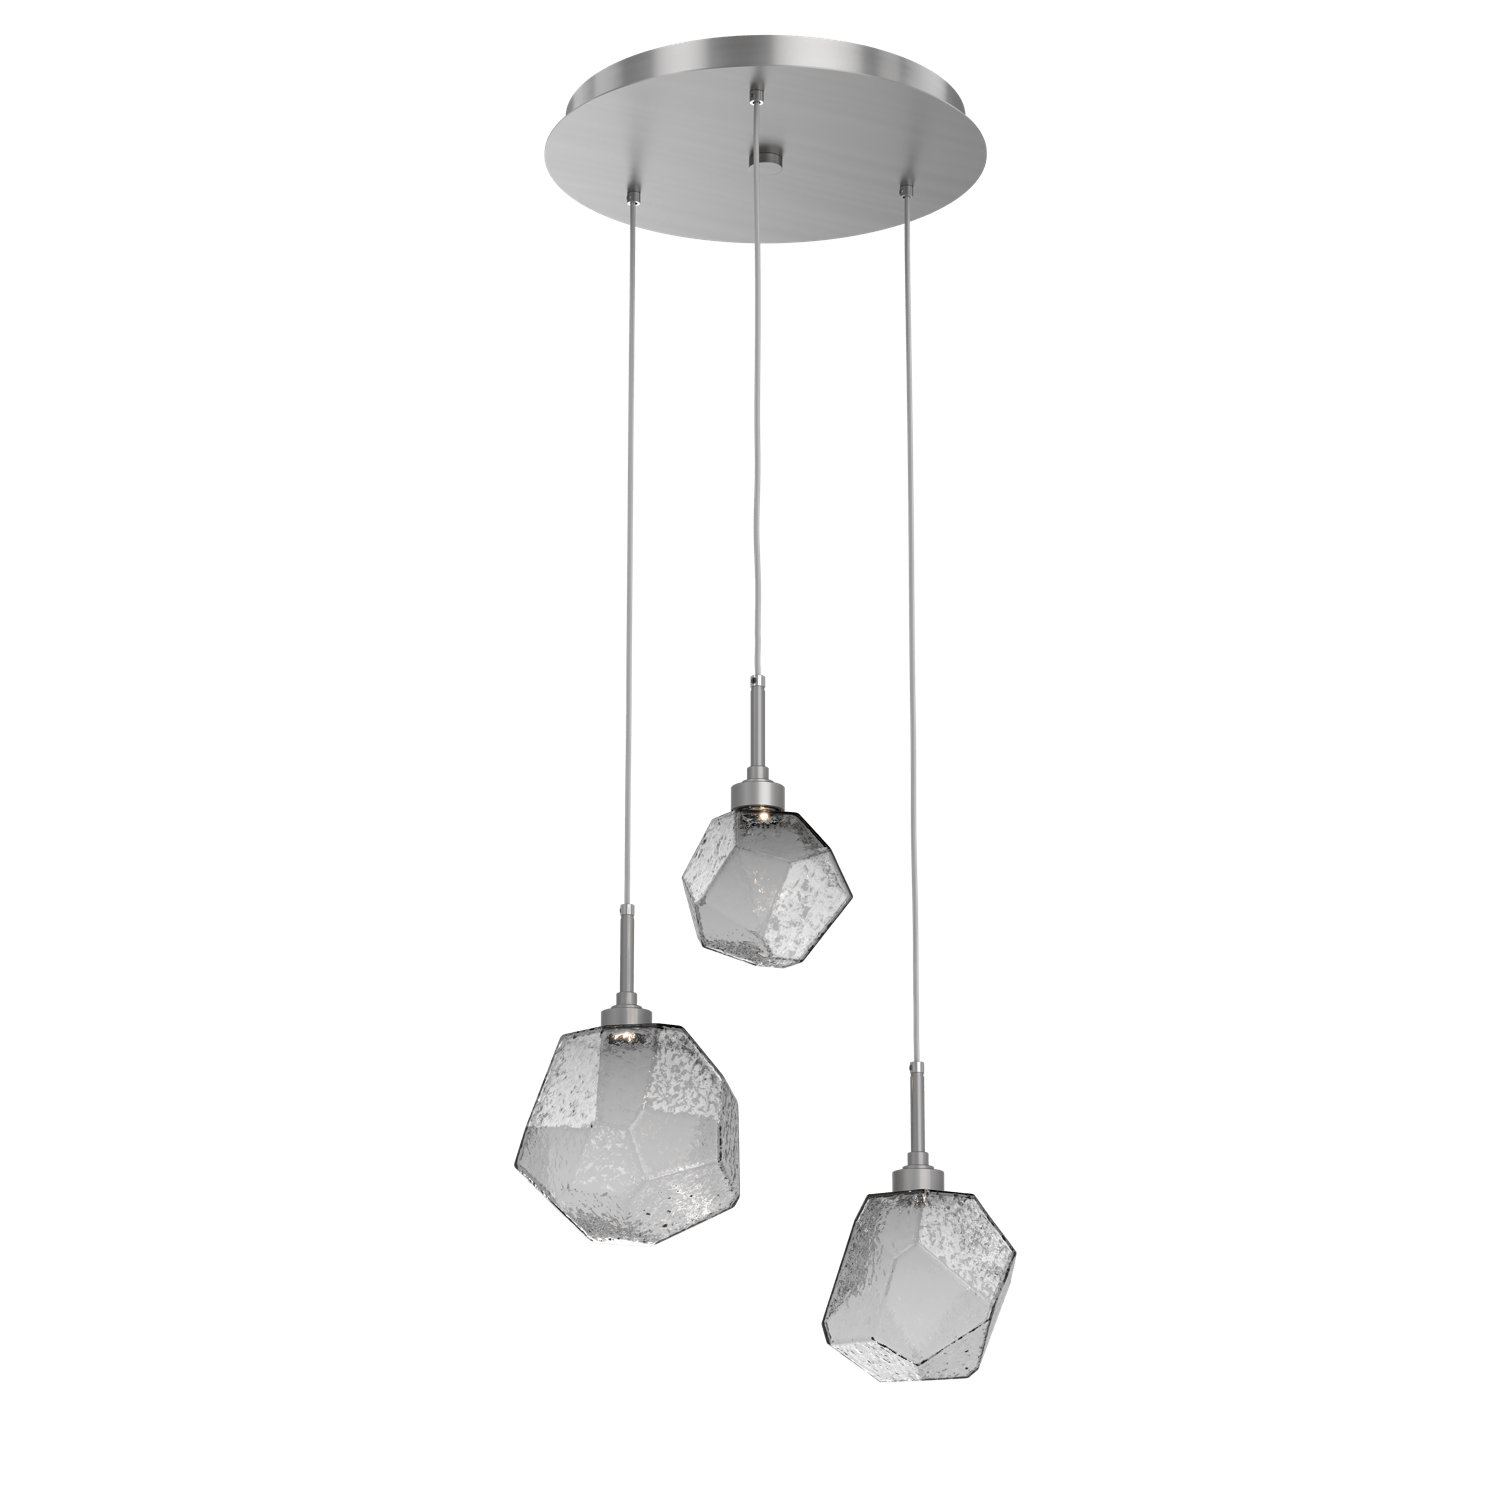 CHB0039-03-SN-S-Hammerton-Studio-Gem-3-light-round-pendant-chandelier-with-satin-nickel-finish-and-smoke-blown-glass-shades-and-LED-lamping